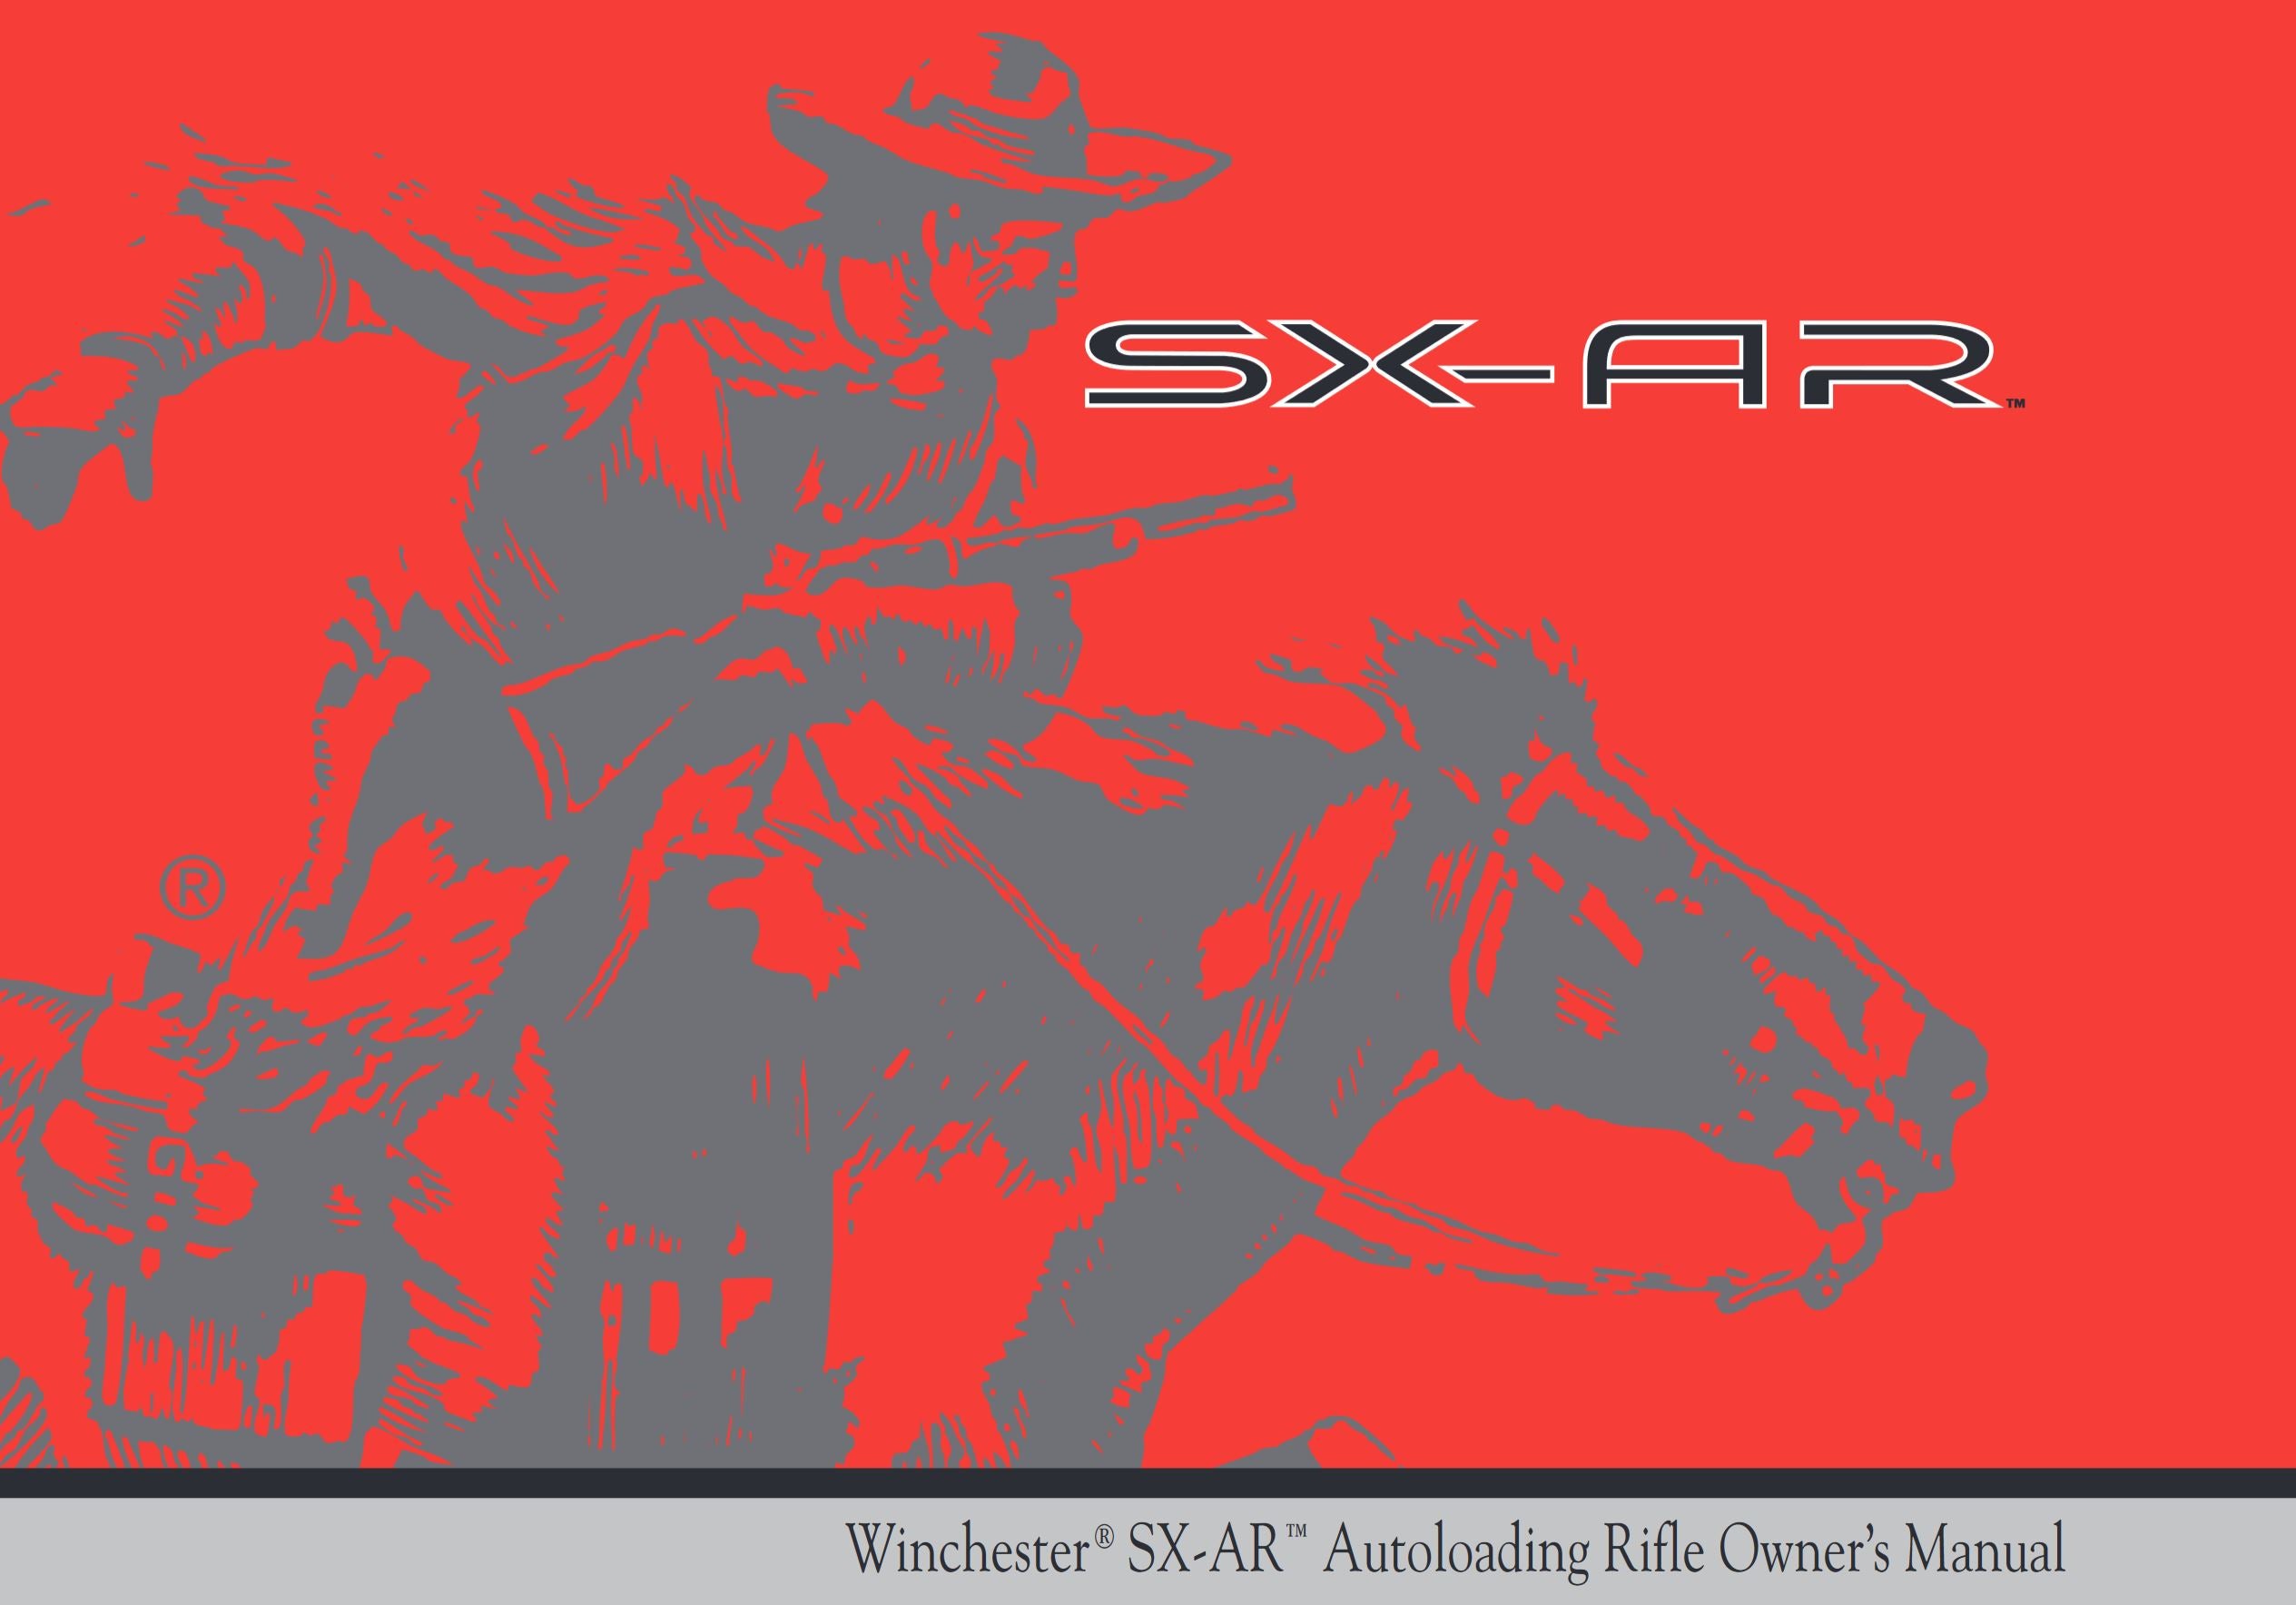 SX-AR Rifle Owner's Manual Cover